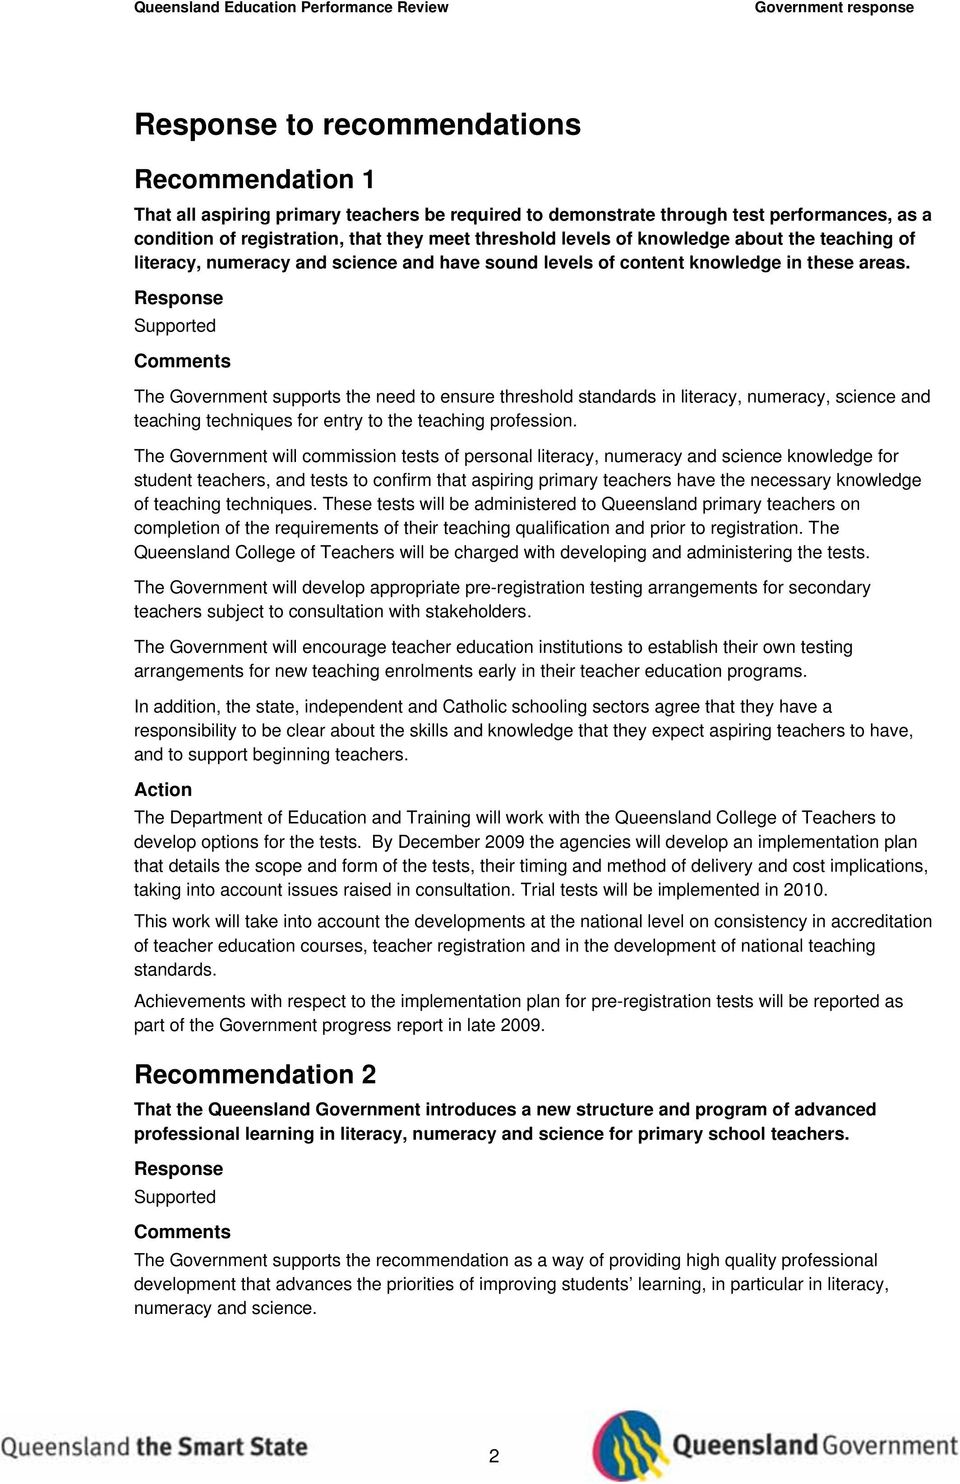 The Government supports the need to ensure threshold standards in literacy, numeracy, science and teaching techniques for entry to the teaching profession.